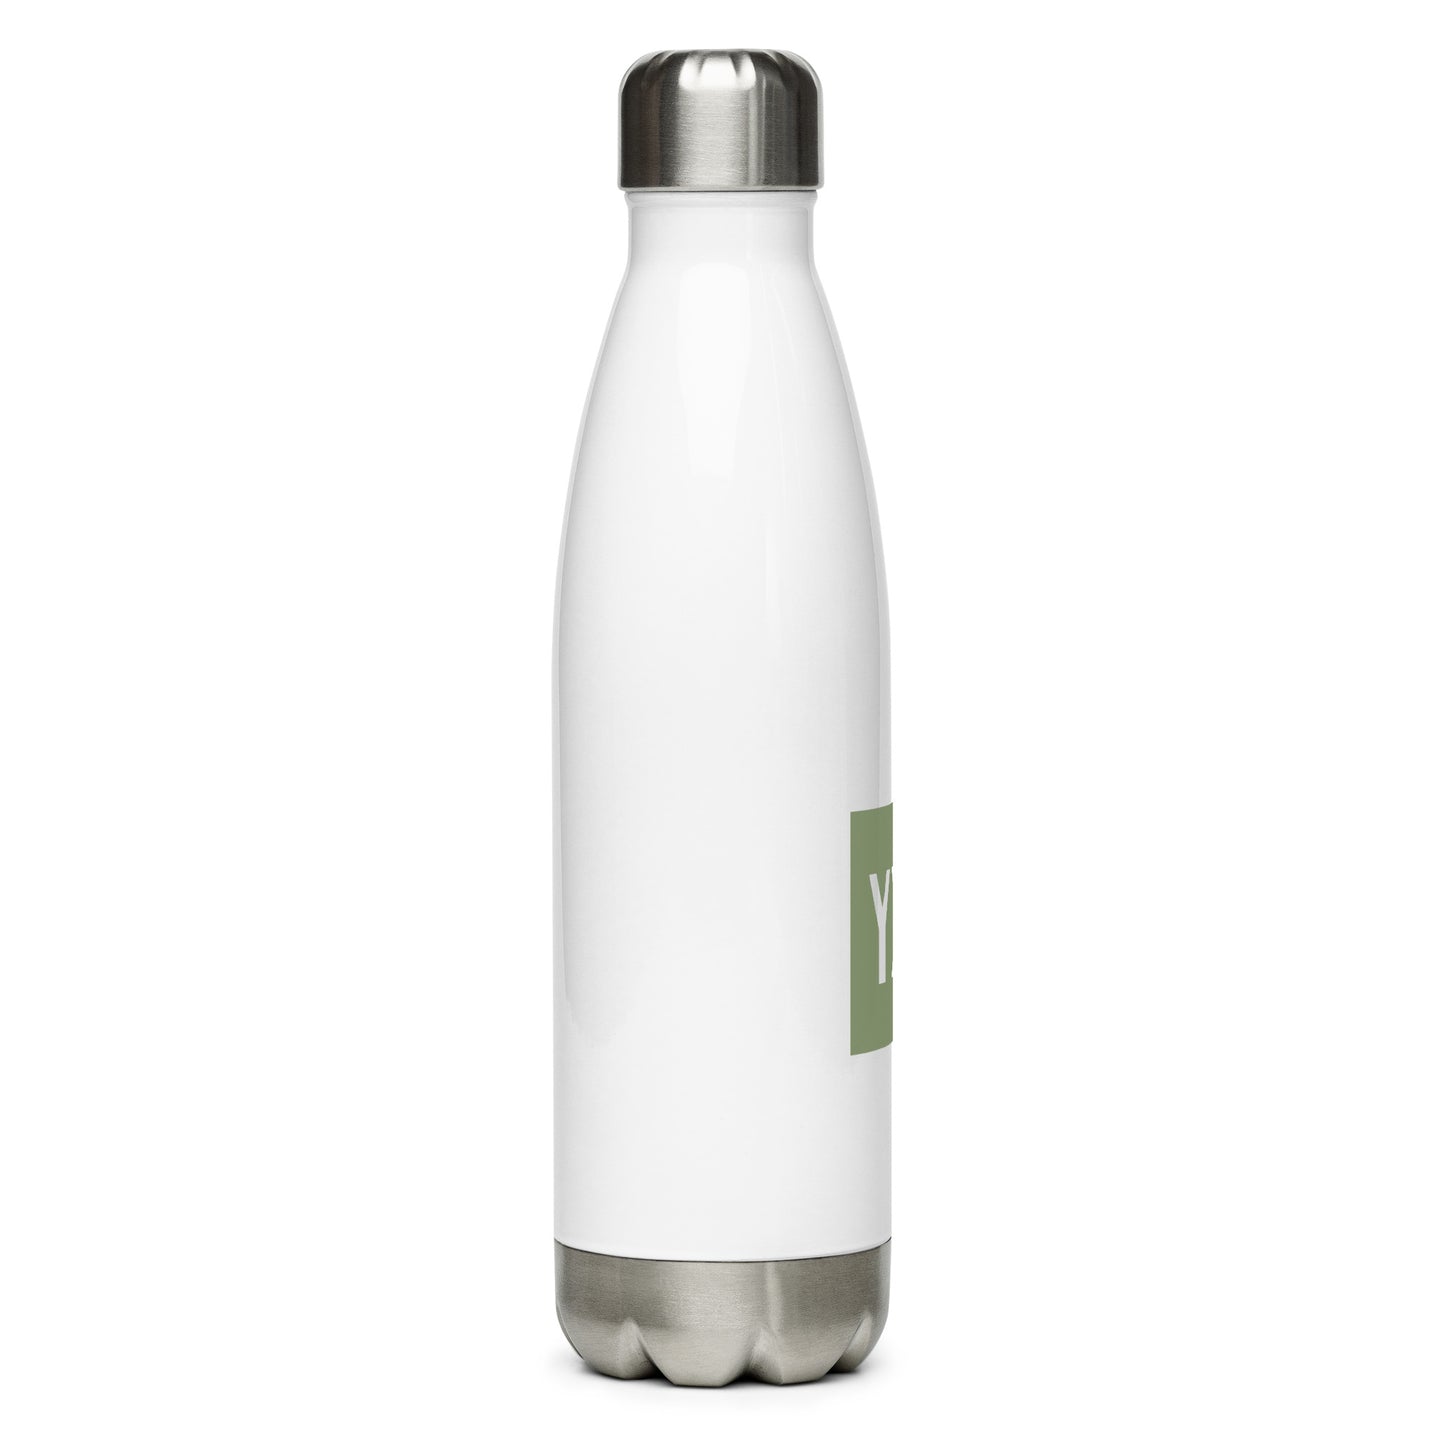 Aviation Gift Water Bottle - Camo Green • YXY Whitehorse • YHM Designs - Image 07